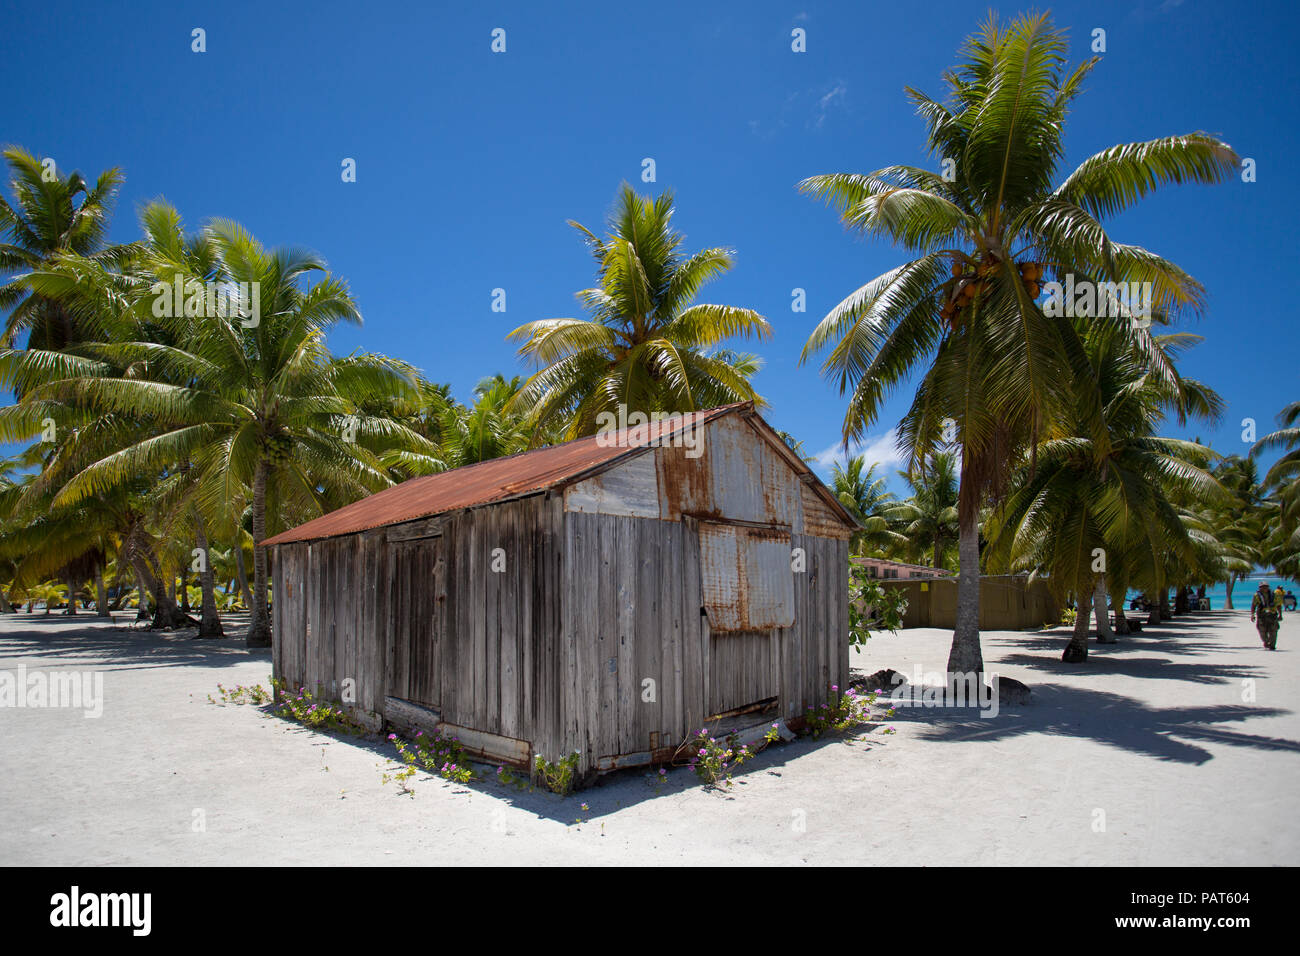 Cook Islands, Palmerston Island. Remote rustic village house with coconut palm trees and white sand Stock Photo